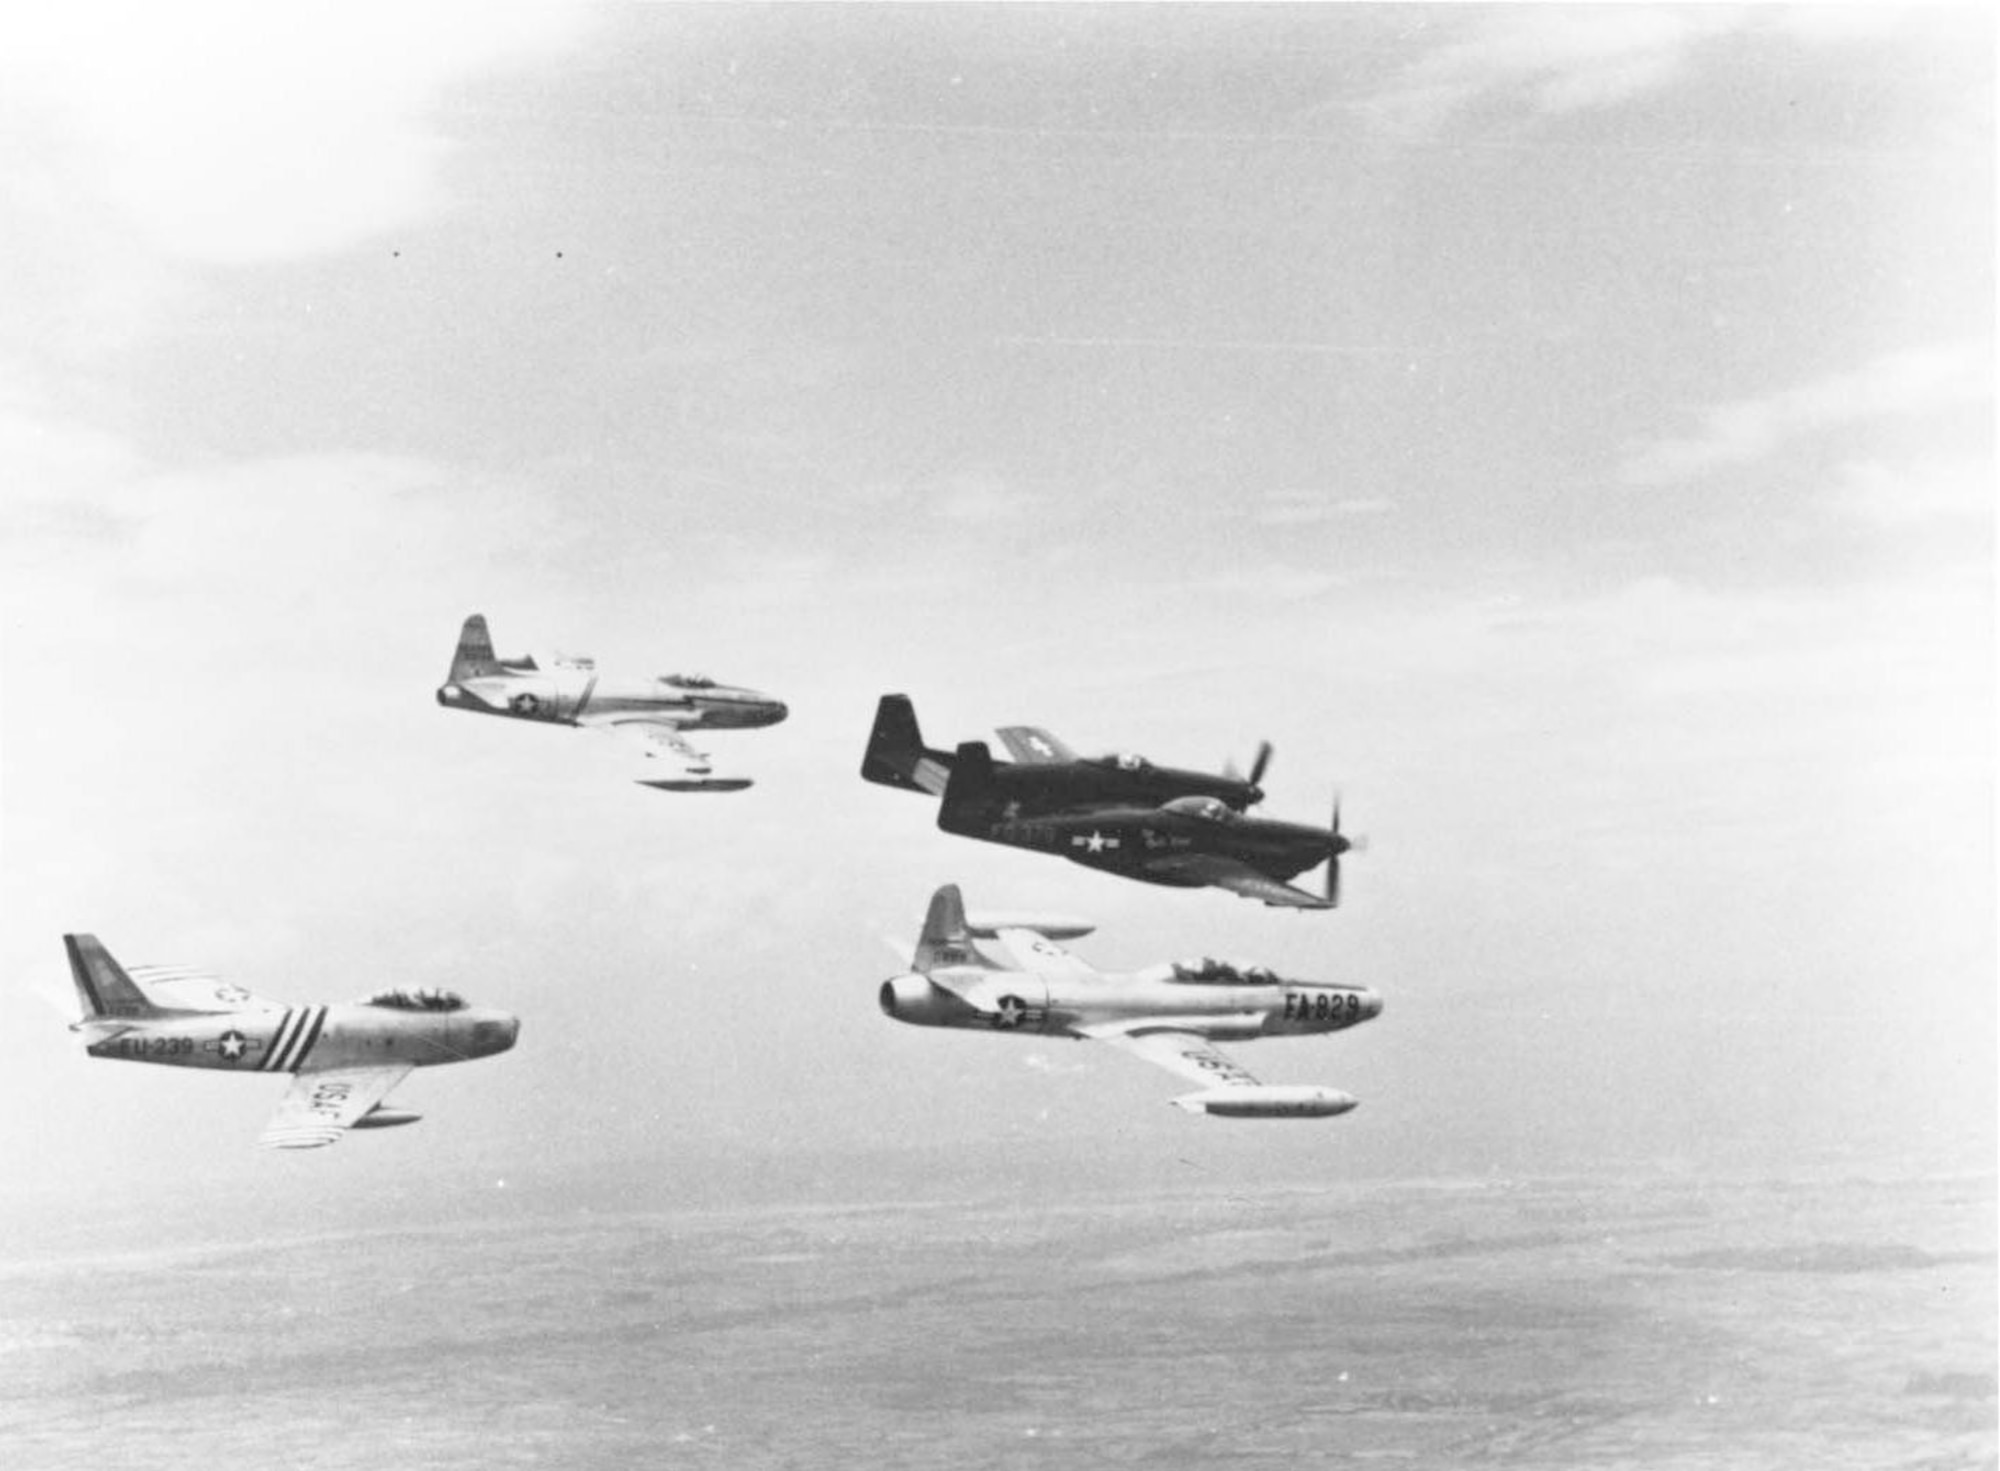 In June 1950 the USAF’s primary day superiority fighter in the Far East was the straight-wing jet F-80 (upper left). The propeller-driven F-82 (upper right) was the primary night fighter. The faster, swept-wing F-86 Sabre (lower left) took over the day fighter role from the F-80 in late 1950, while the jet-powered F-94 (lower right) replaced the F-82 in 1951. (U.S. Air Force photo)